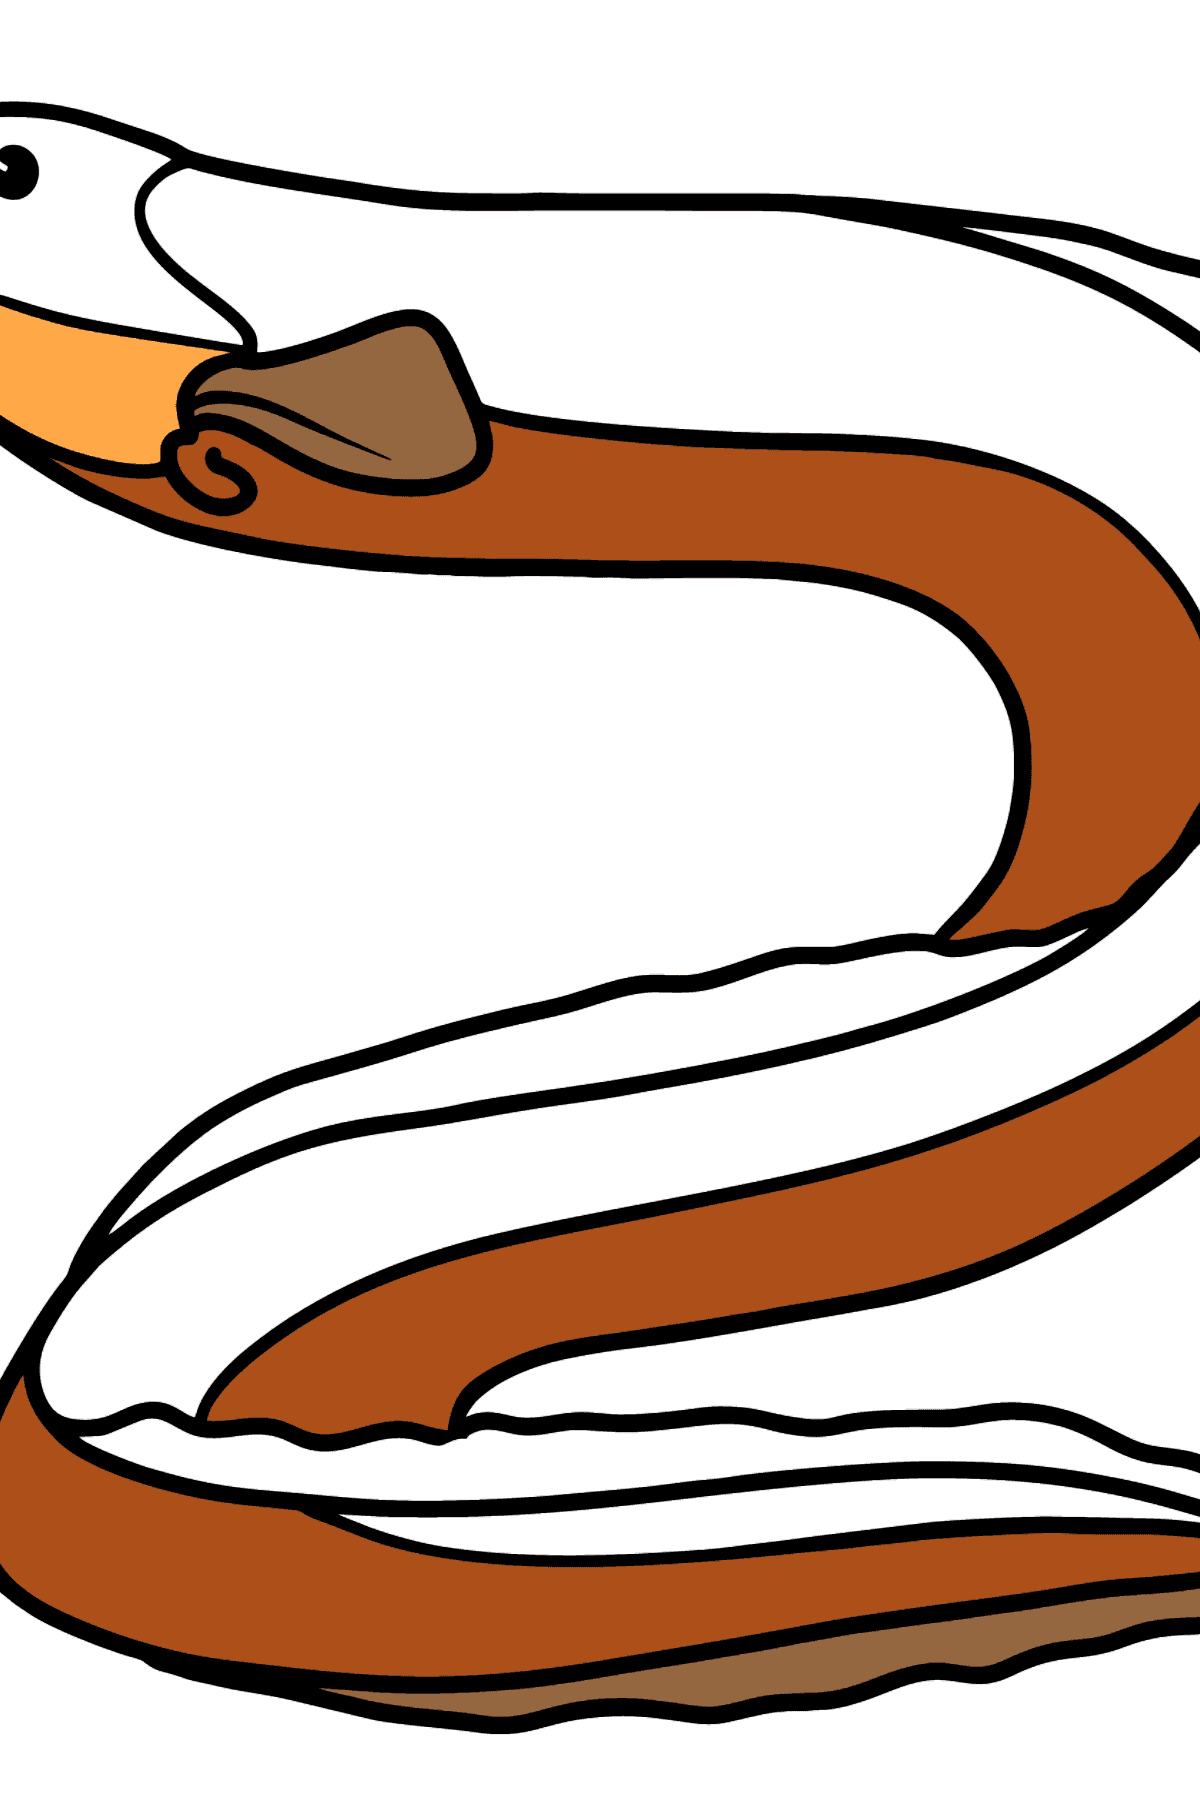 Eel coloring page - Coloring Pages for Kids